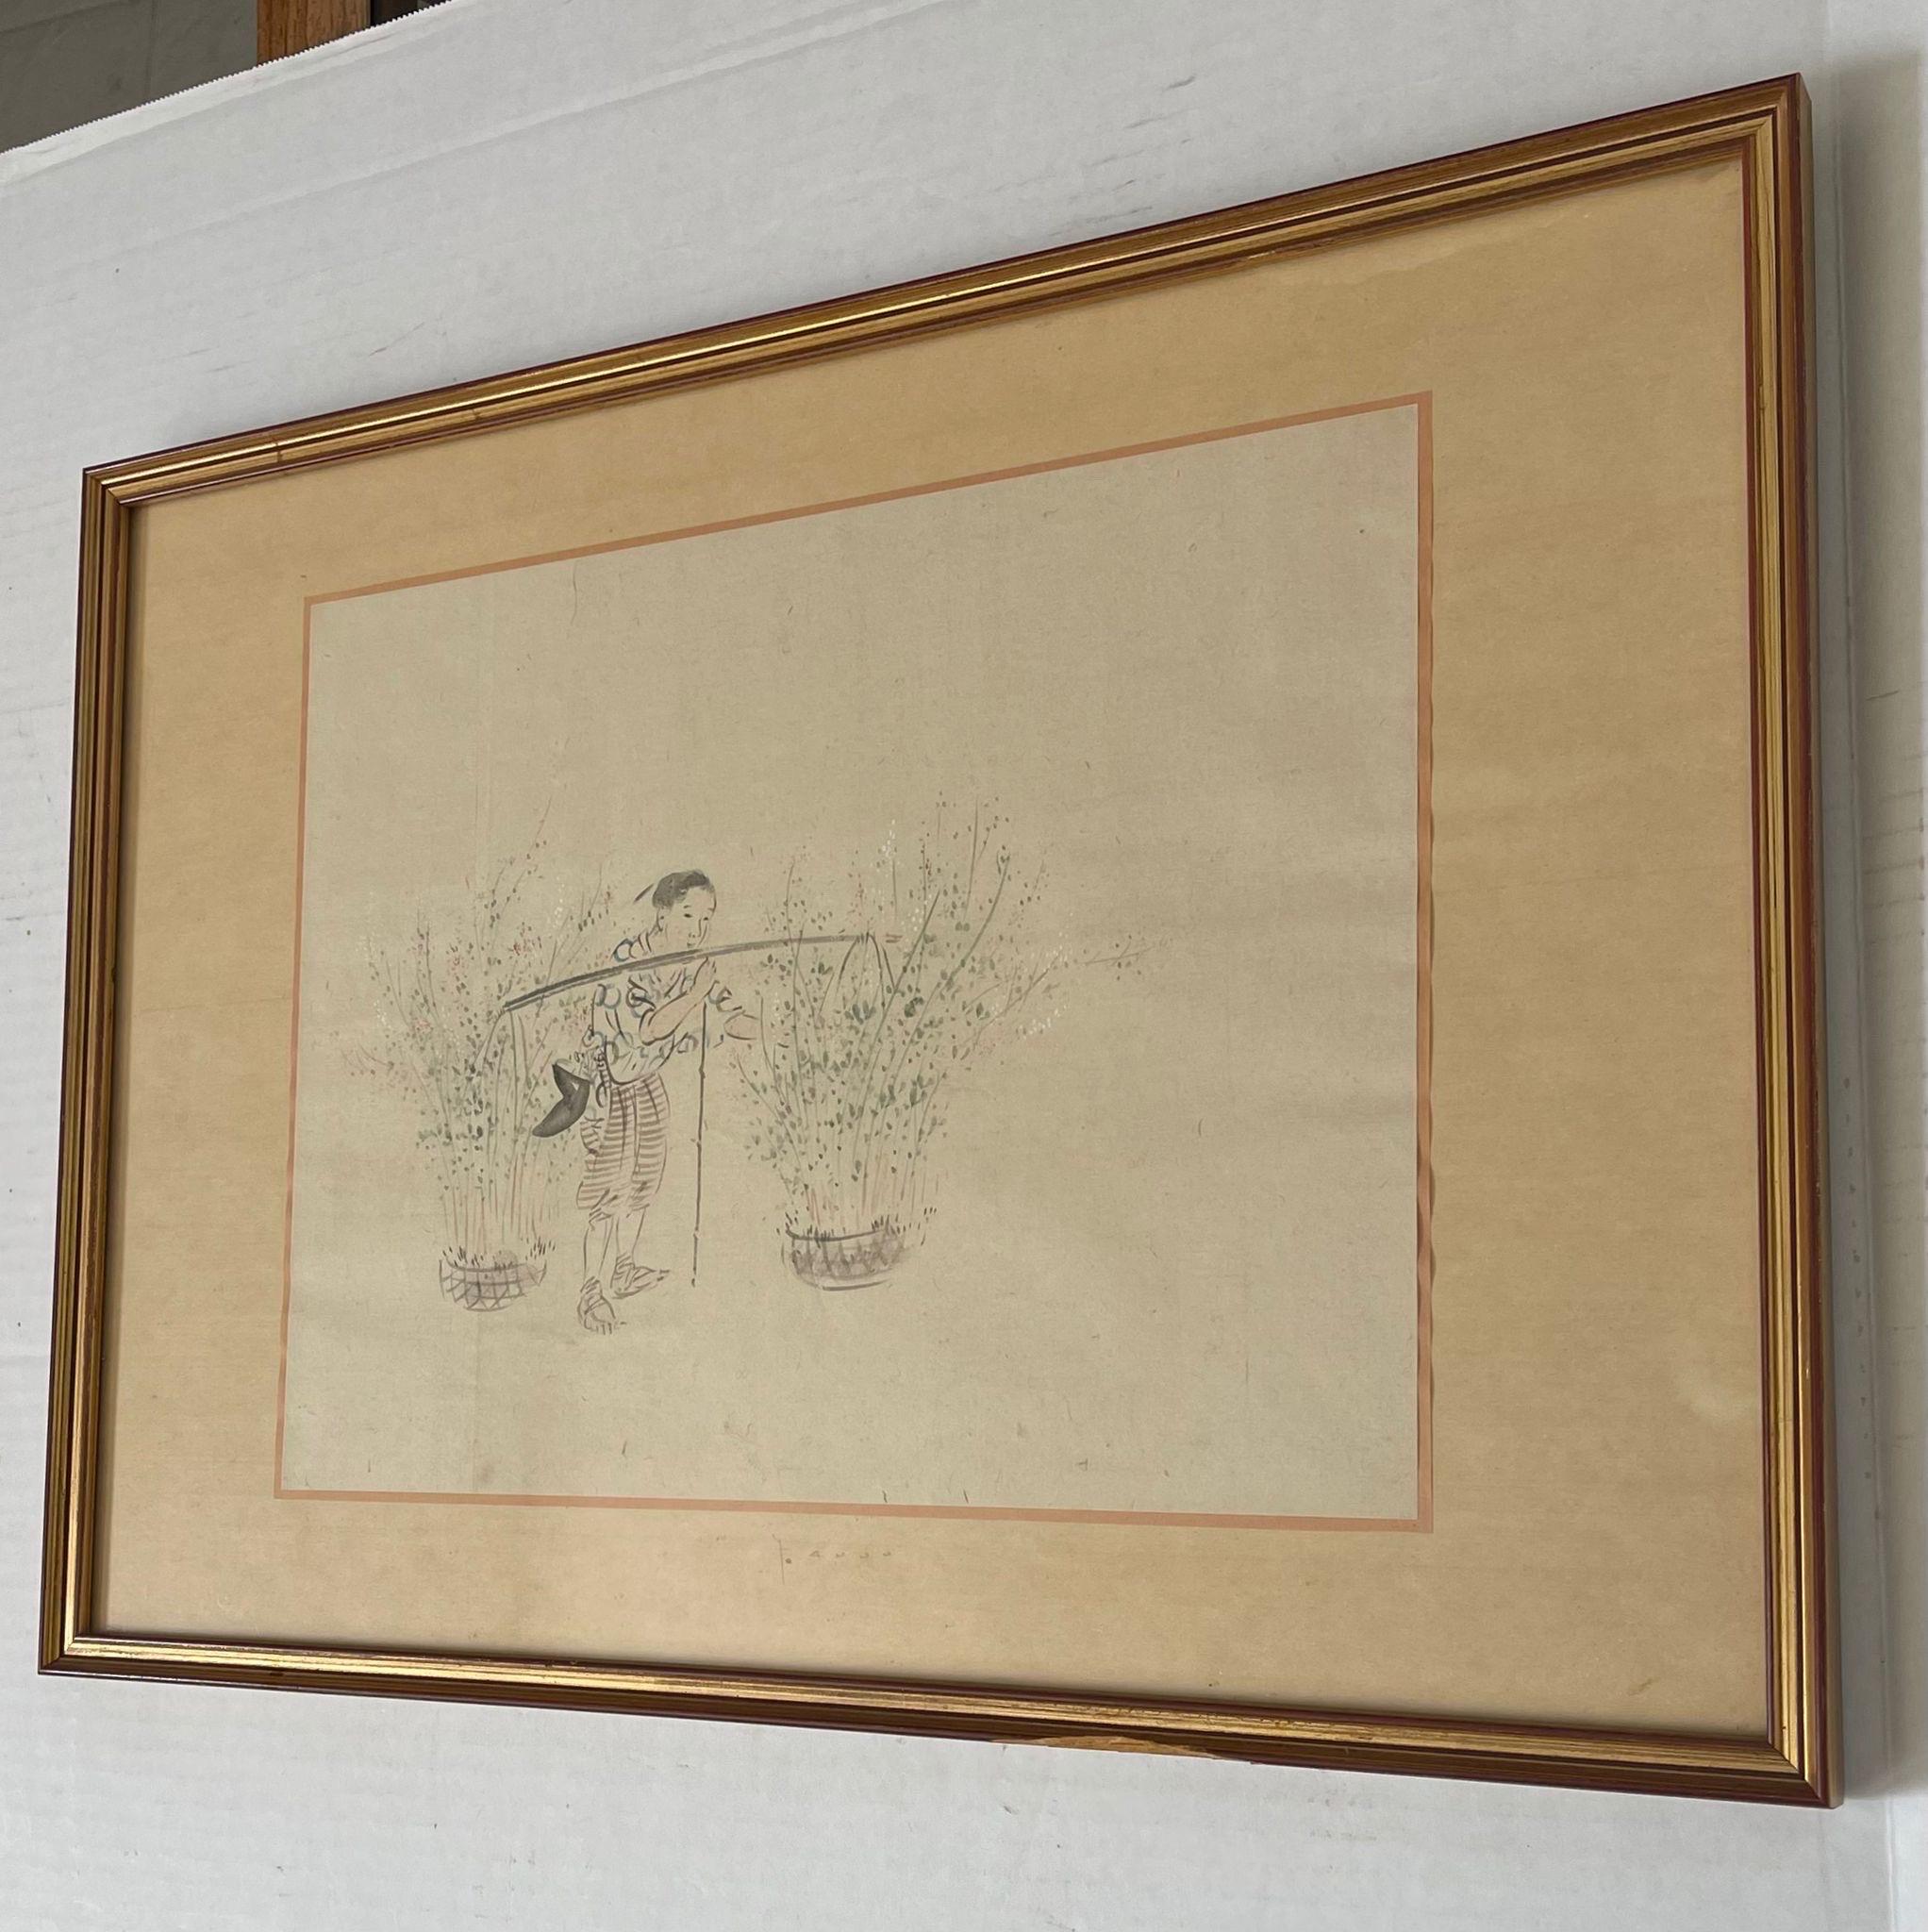 This beautiful watercolor is framed and matted within a gold toned frame. Painting depicts a man carrying flower bushes. More information on the painting is on the back, as shown. Vintage Condition Consistent with Age as Pictured.

Dimensions. 21 W